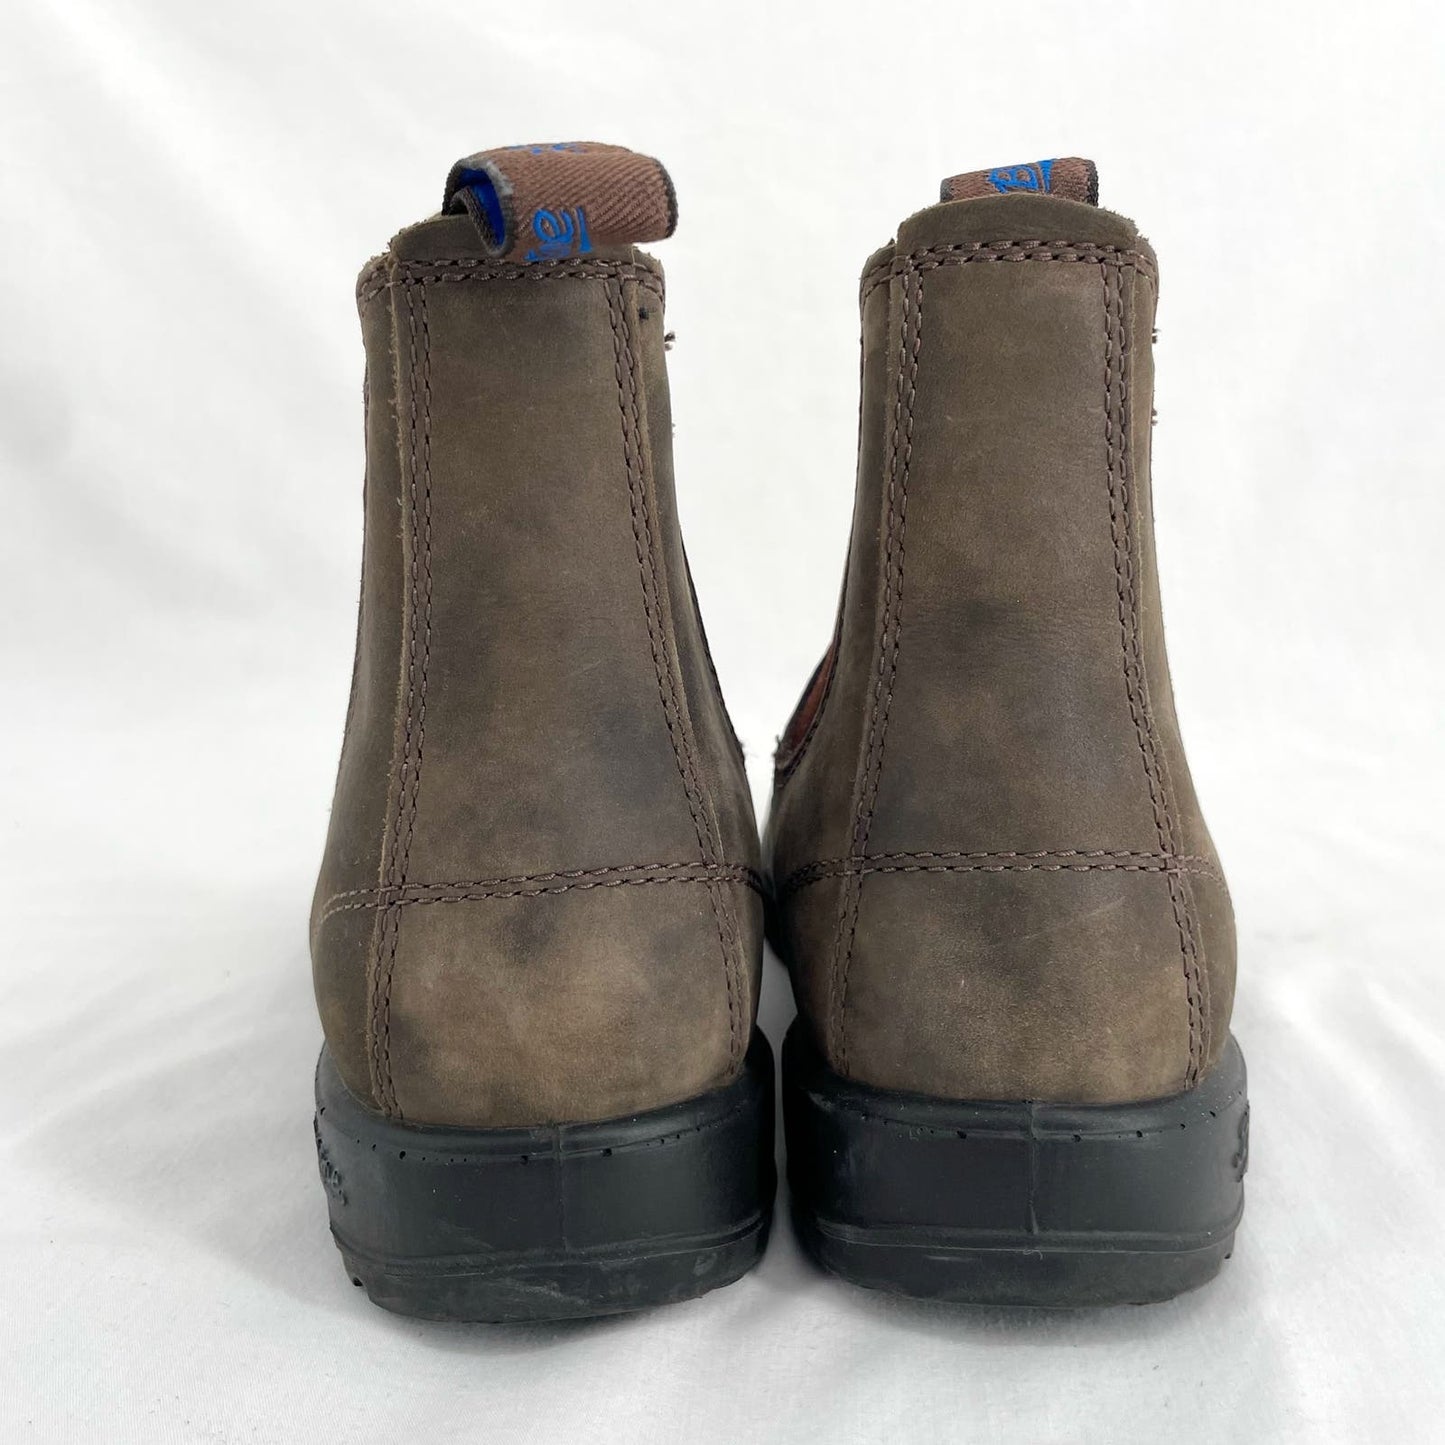 Blundstone #584 Rustic Brown Thermal Leather Chelsea Style Insulated Work Boots Size AU 5.5